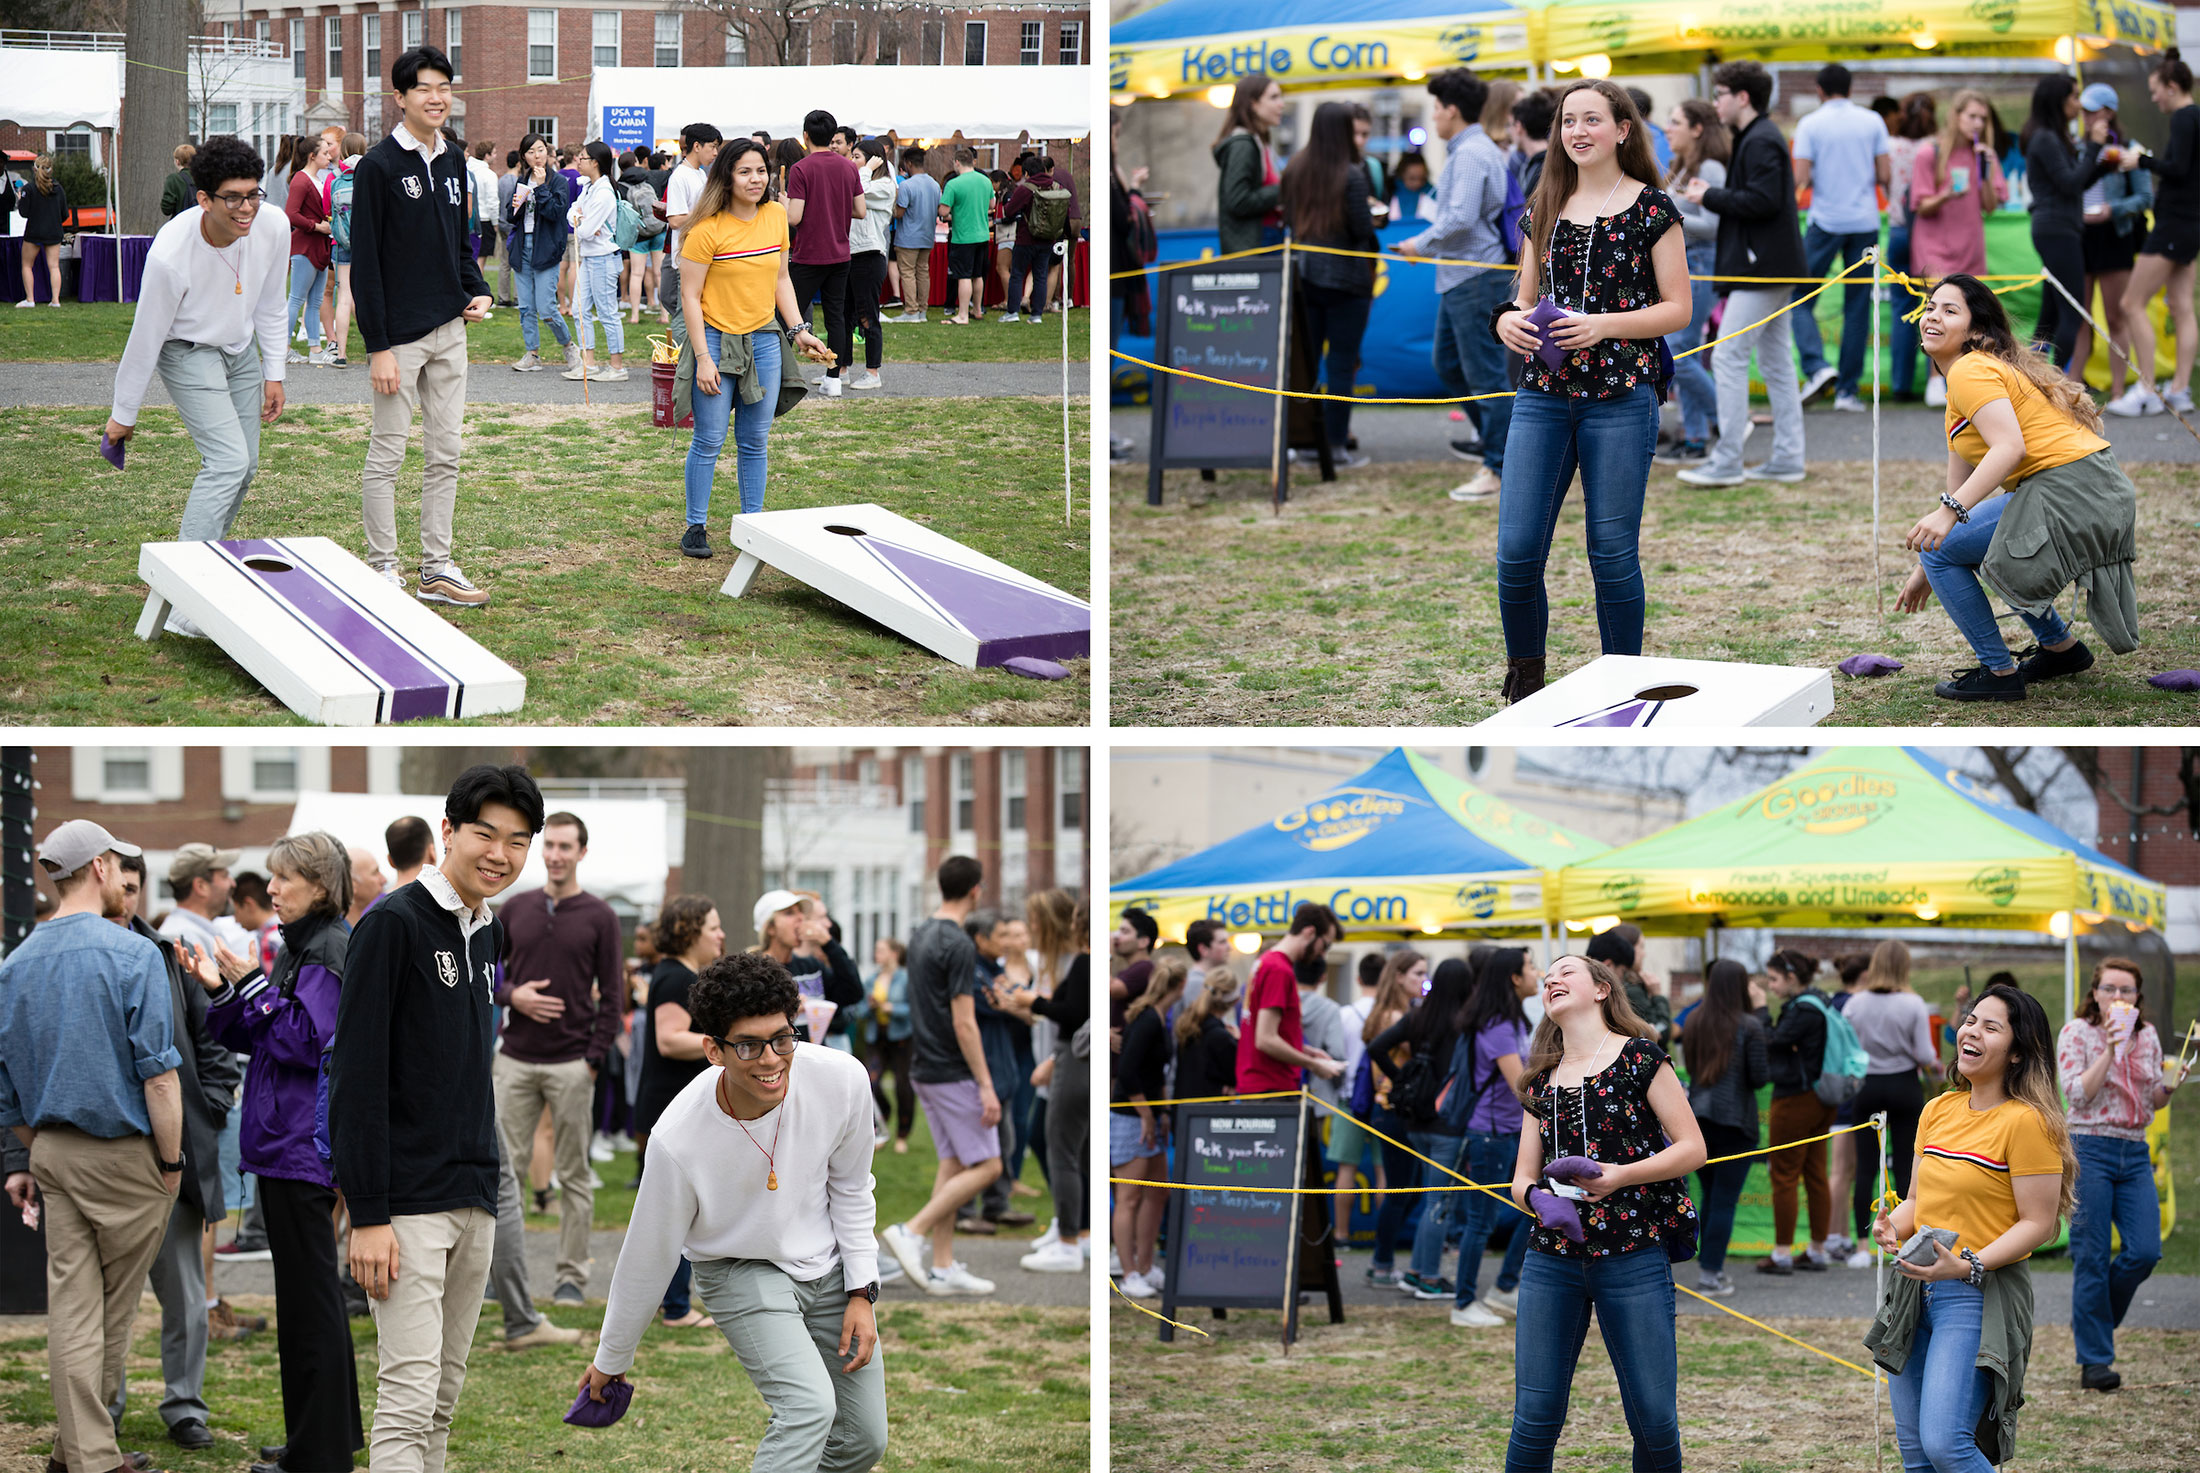 Students at City Streets festival, Amherst College